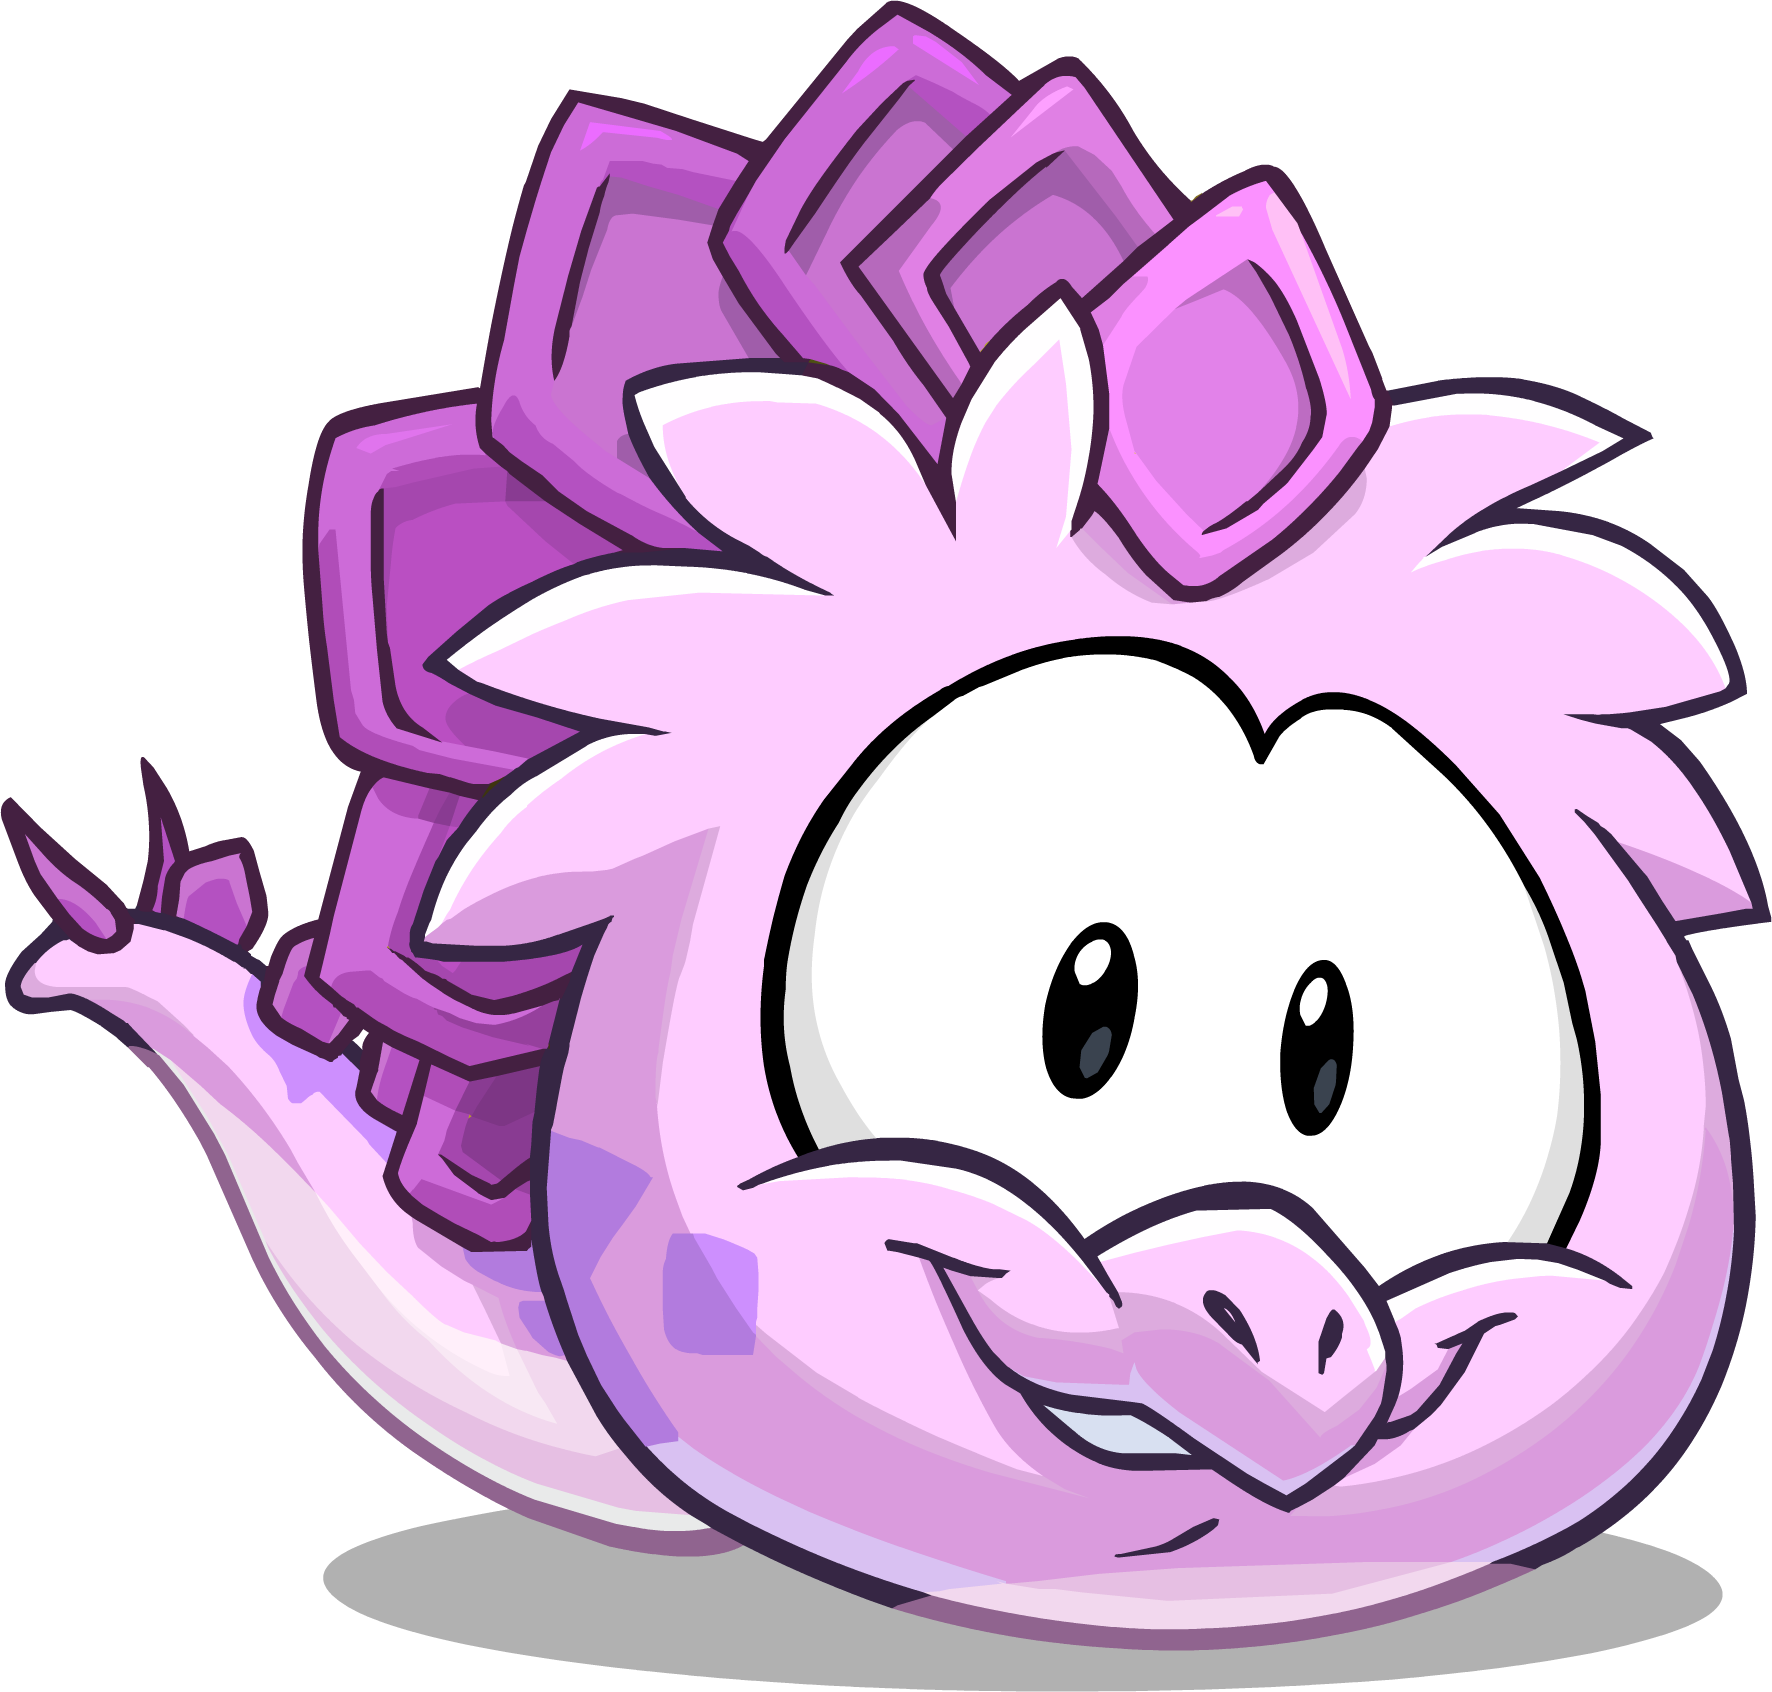 Puffle Powers - Club Penguin Puffle Dino - (1772x1692) Png Clipart Download